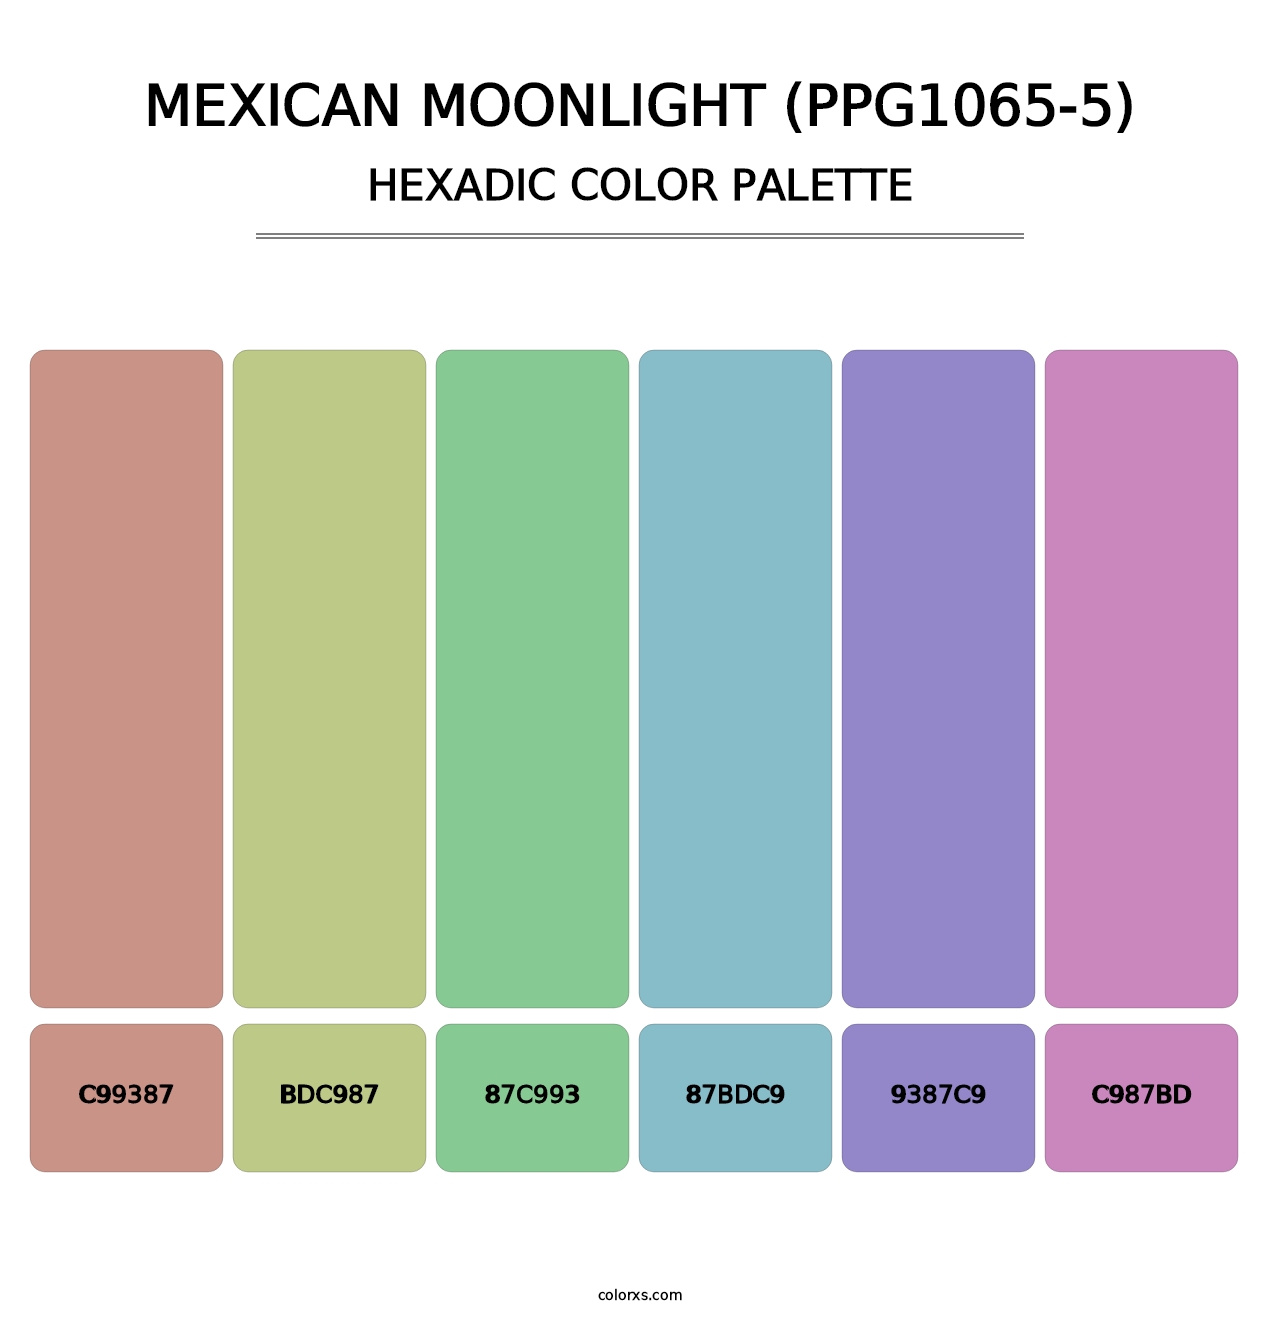 Mexican Moonlight (PPG1065-5) - Hexadic Color Palette